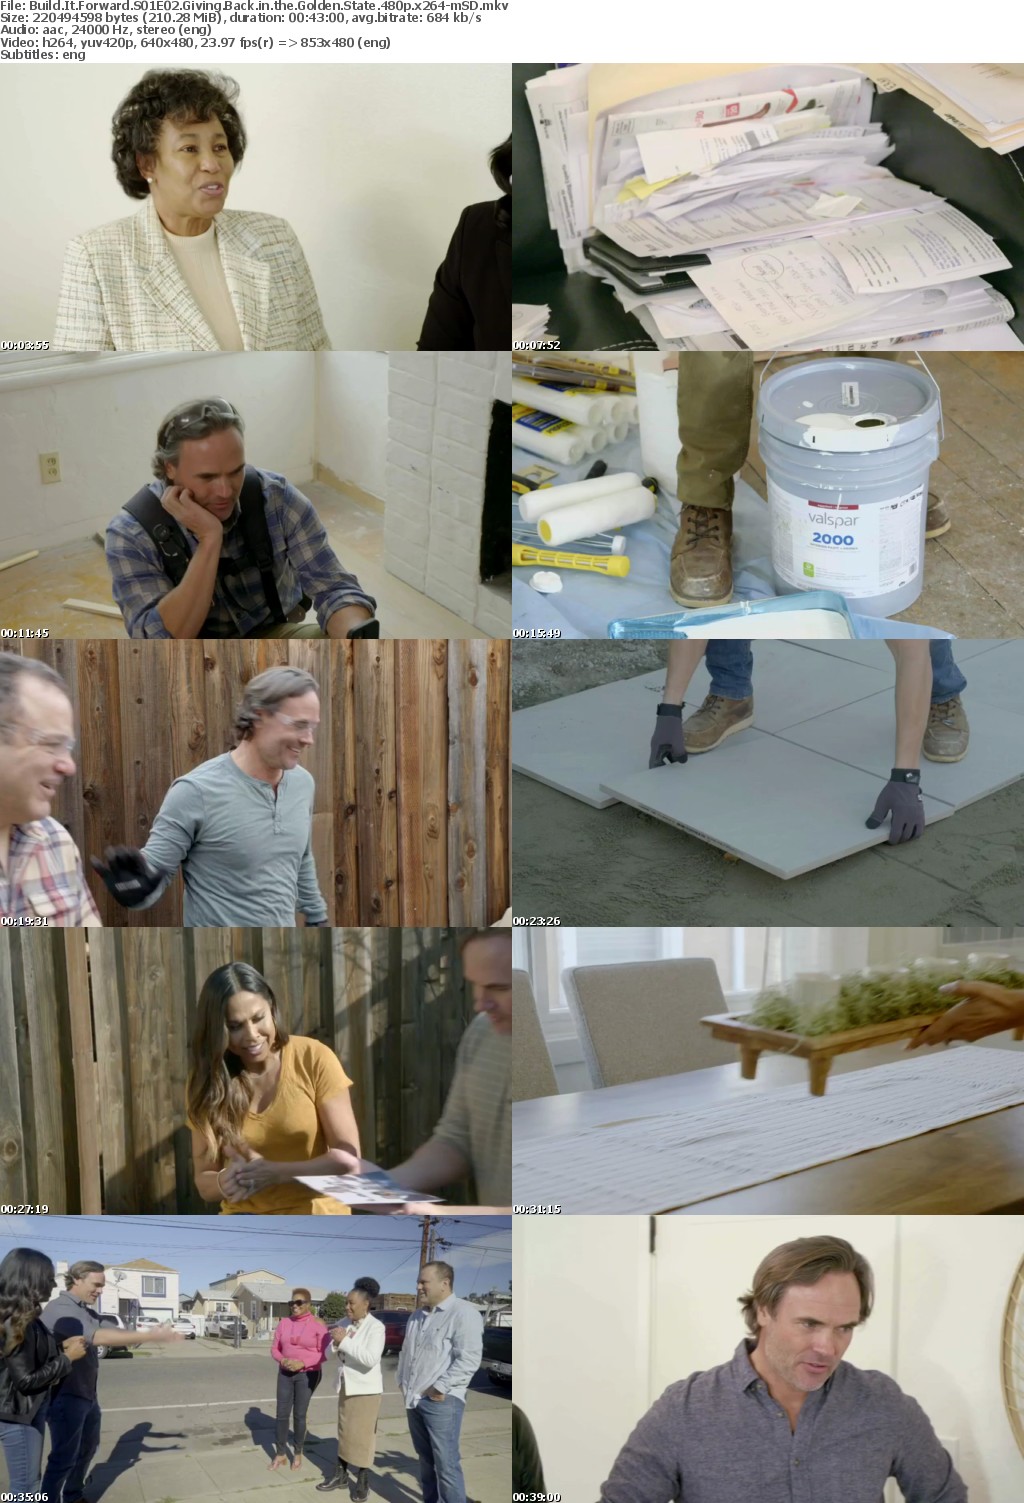 Build It Forward S01E02 Giving Back in the Golden State 480p x264-mSD